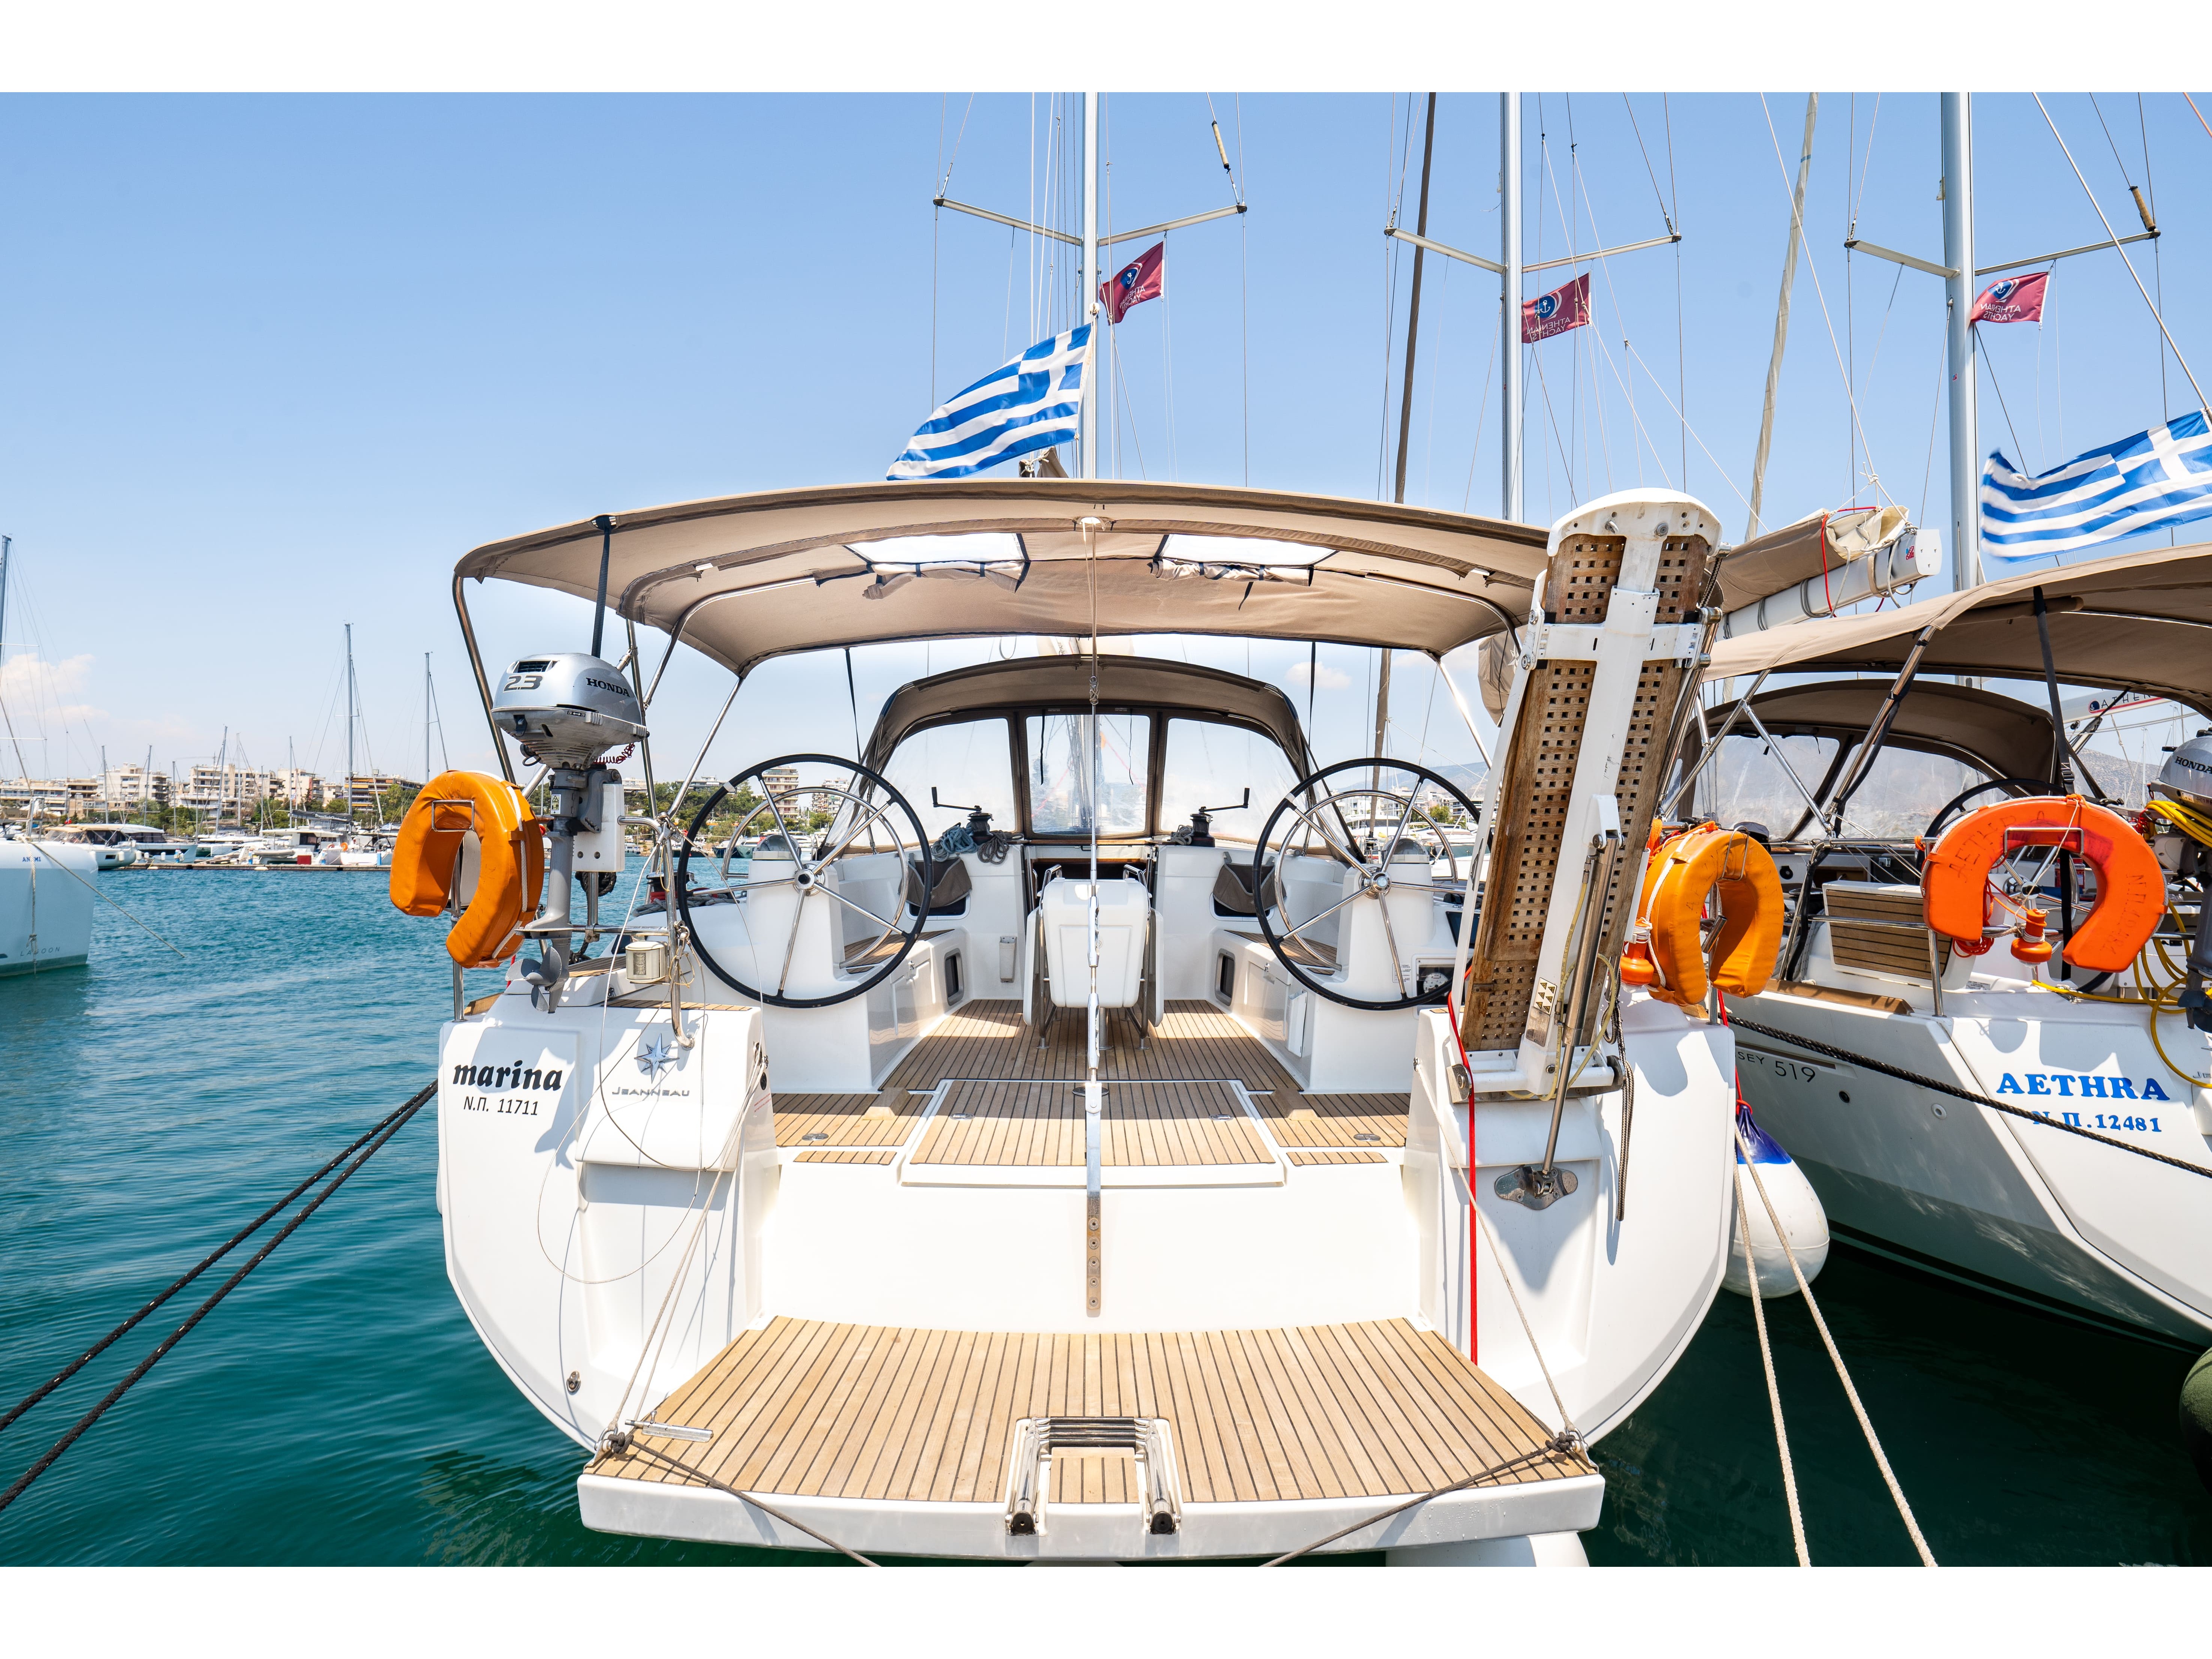 Sun Odyssey 519 - Yacht Charter Athens & Boat hire in Greece Athens and Saronic Gulf Athens Alimos Alimos Marina 4